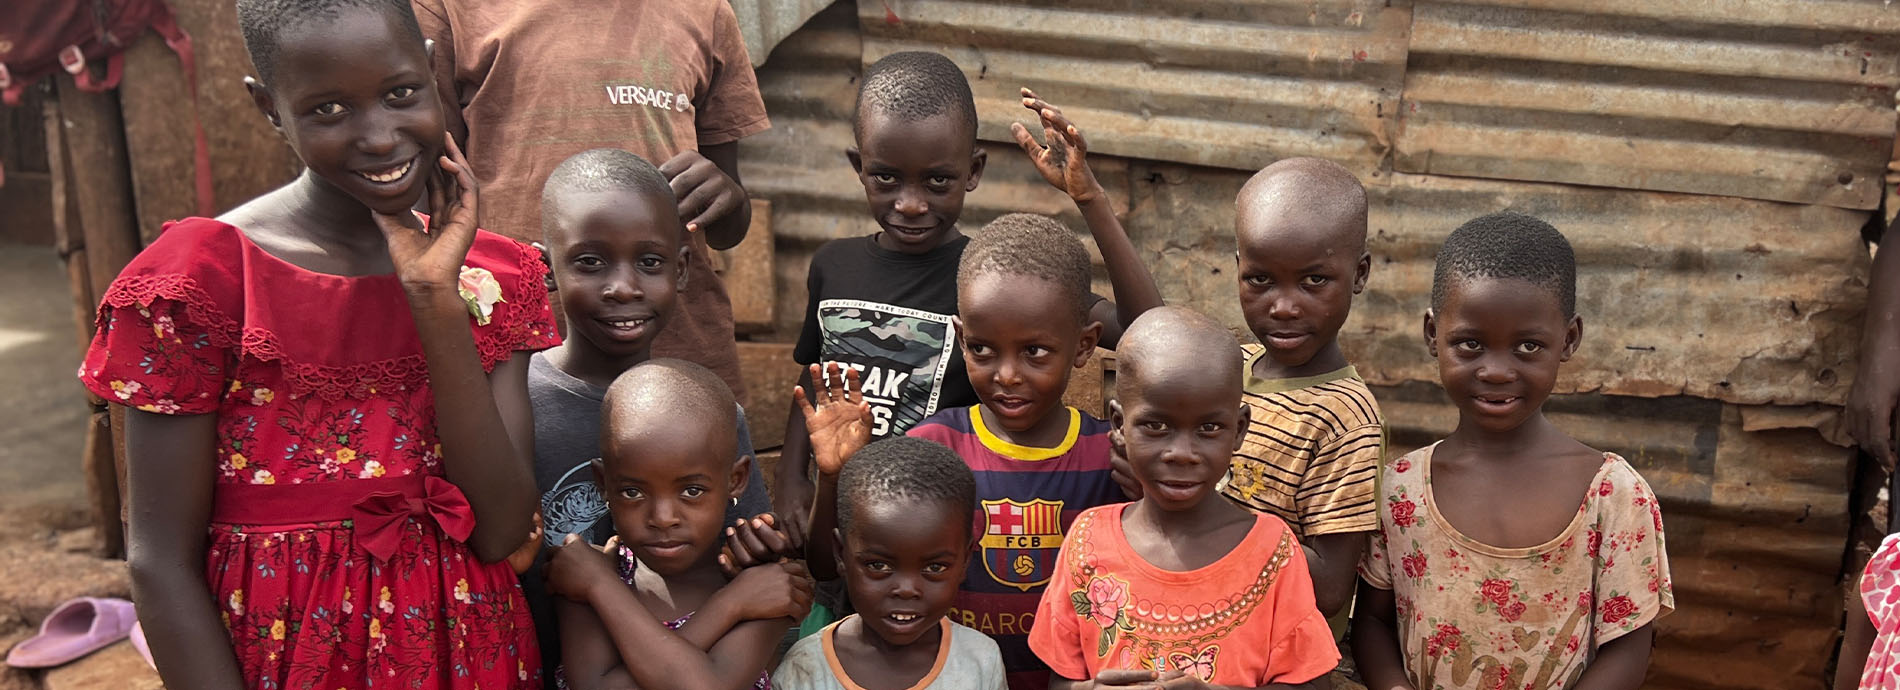 children in Uganda being helped by One More Child